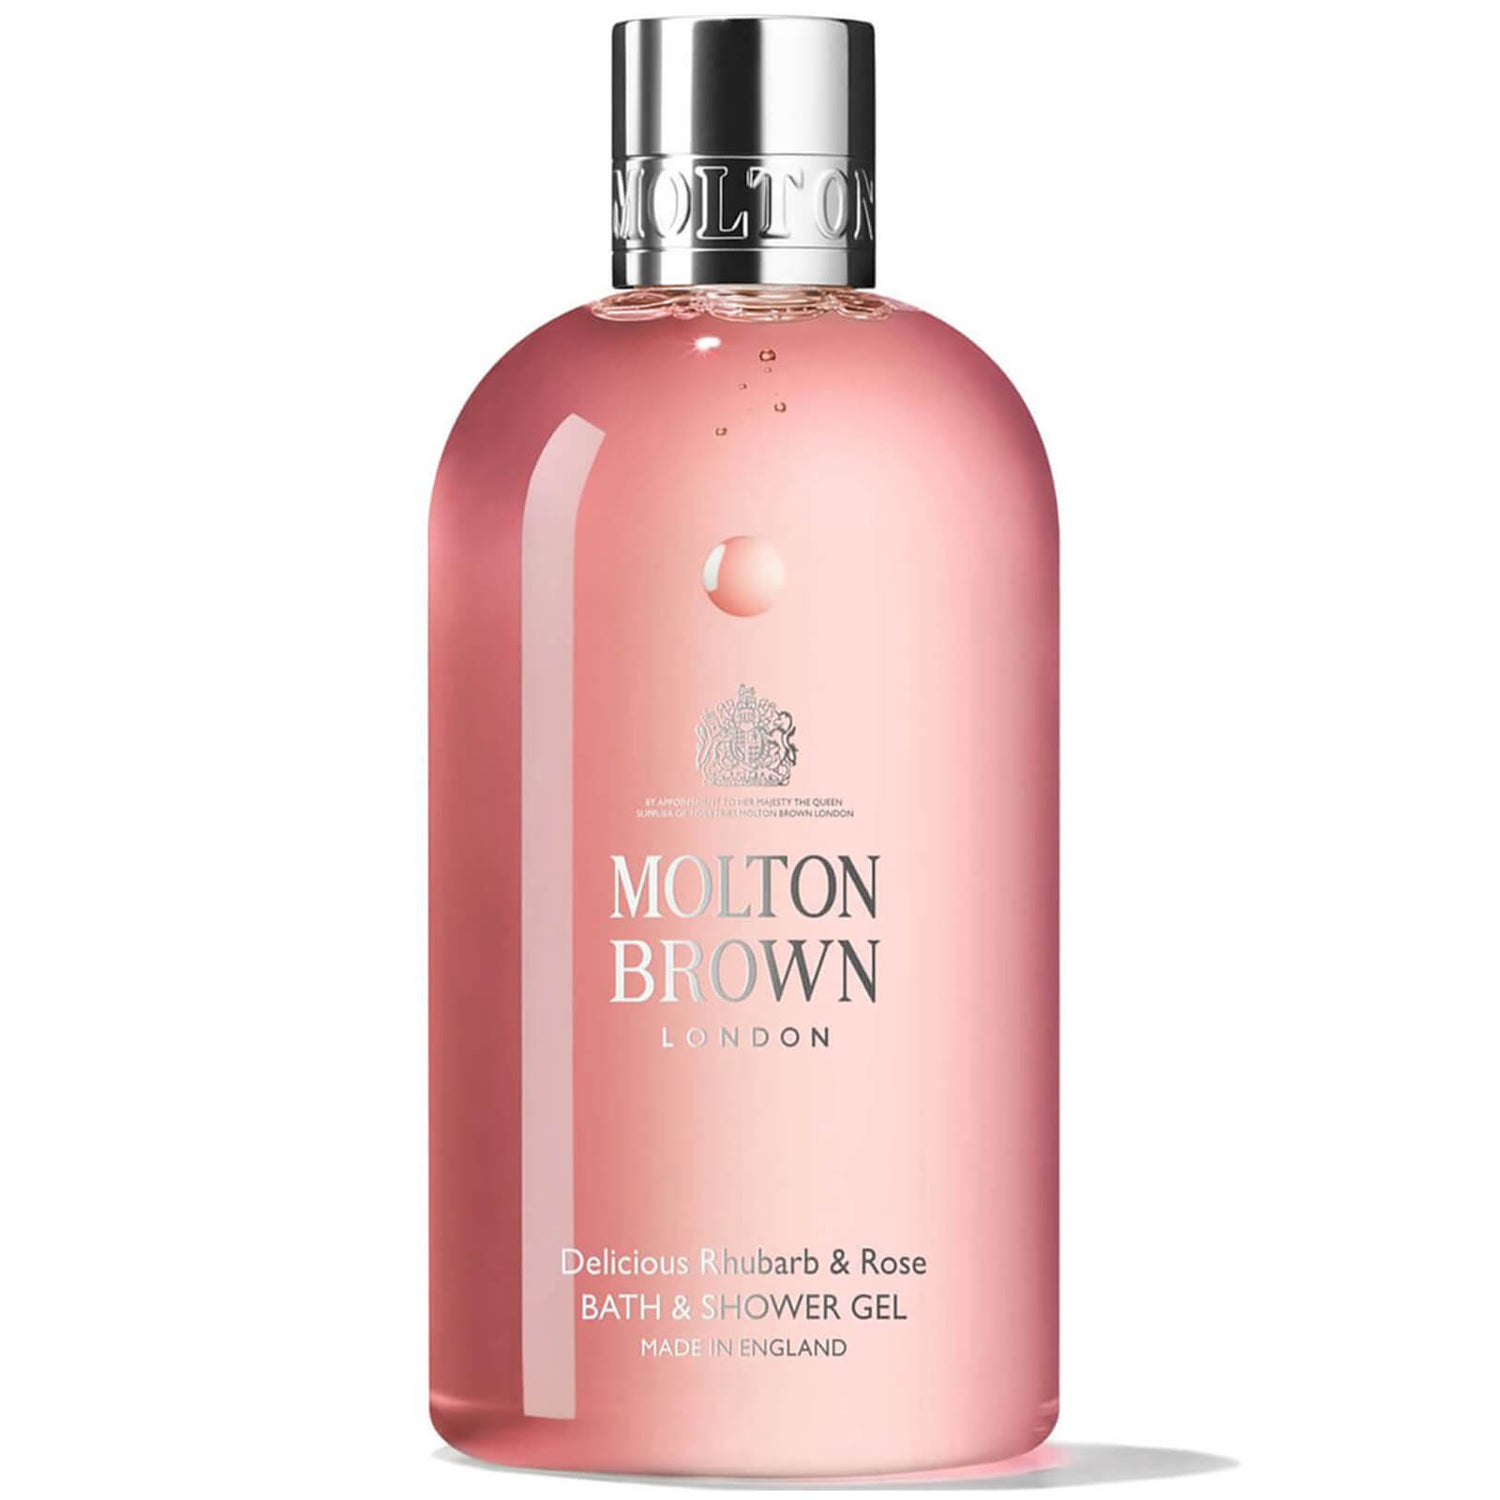 Molton Brown Delicious Rhubarb and Rose Bath and Shower Gel -kylpy- ja suihkugeeli (300ml)